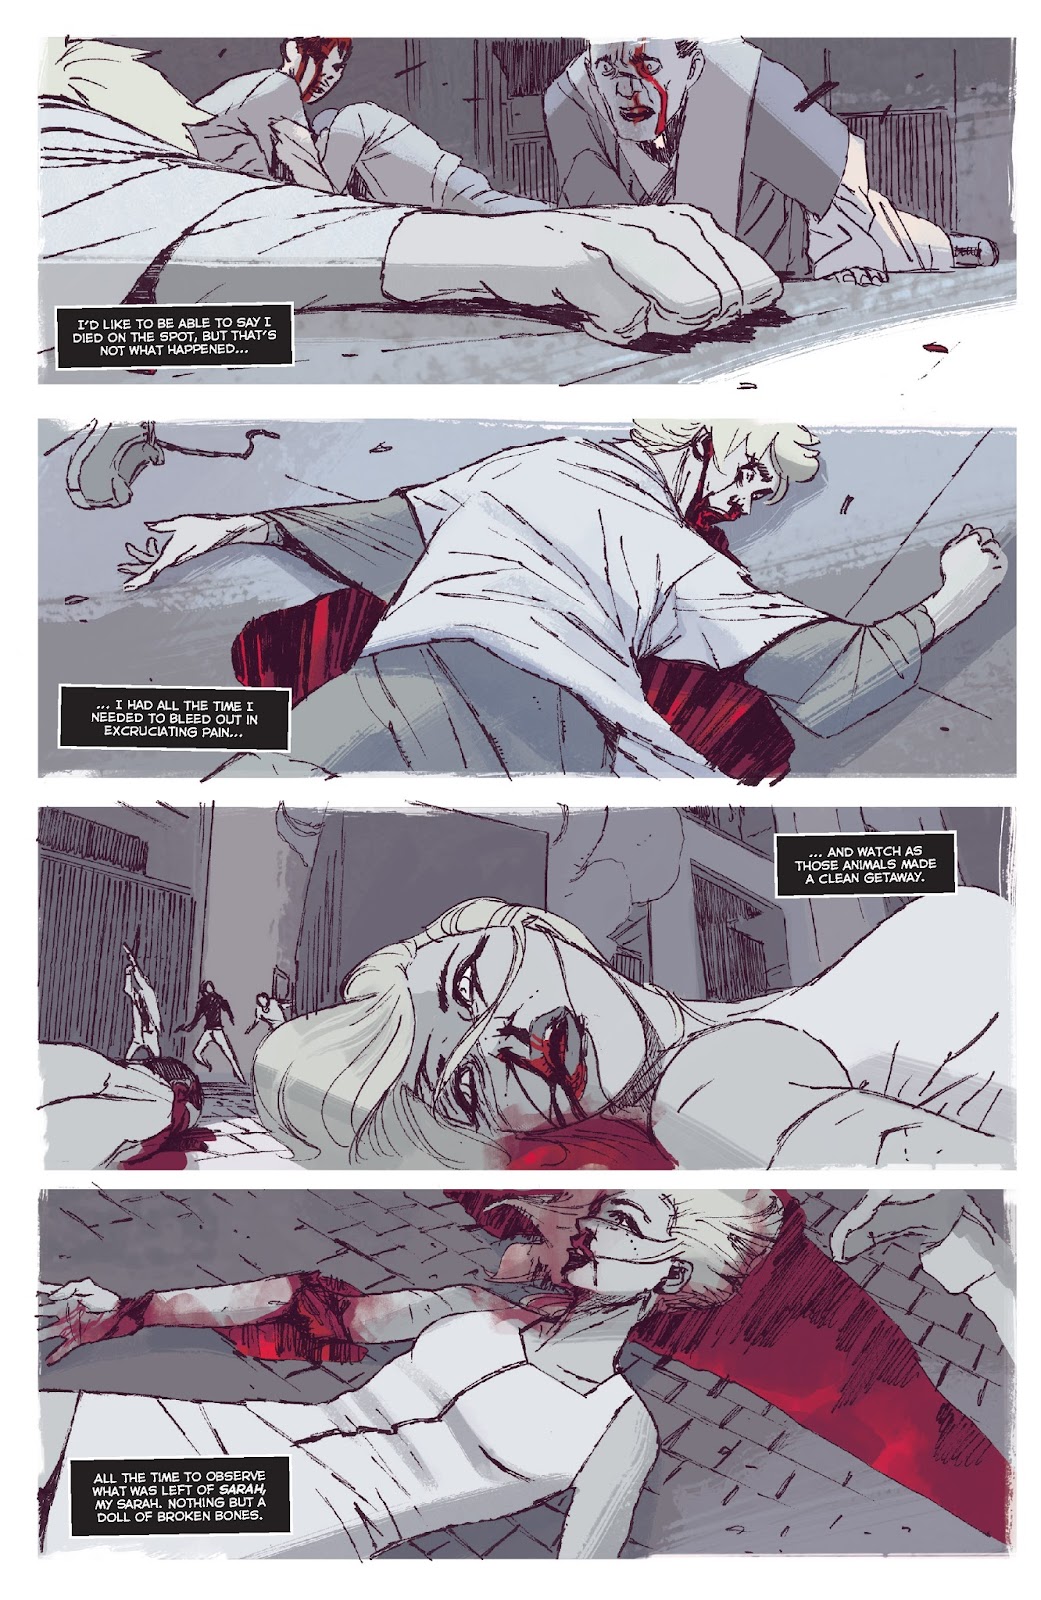 The Crow: Memento Mori issue 1 - Page 10